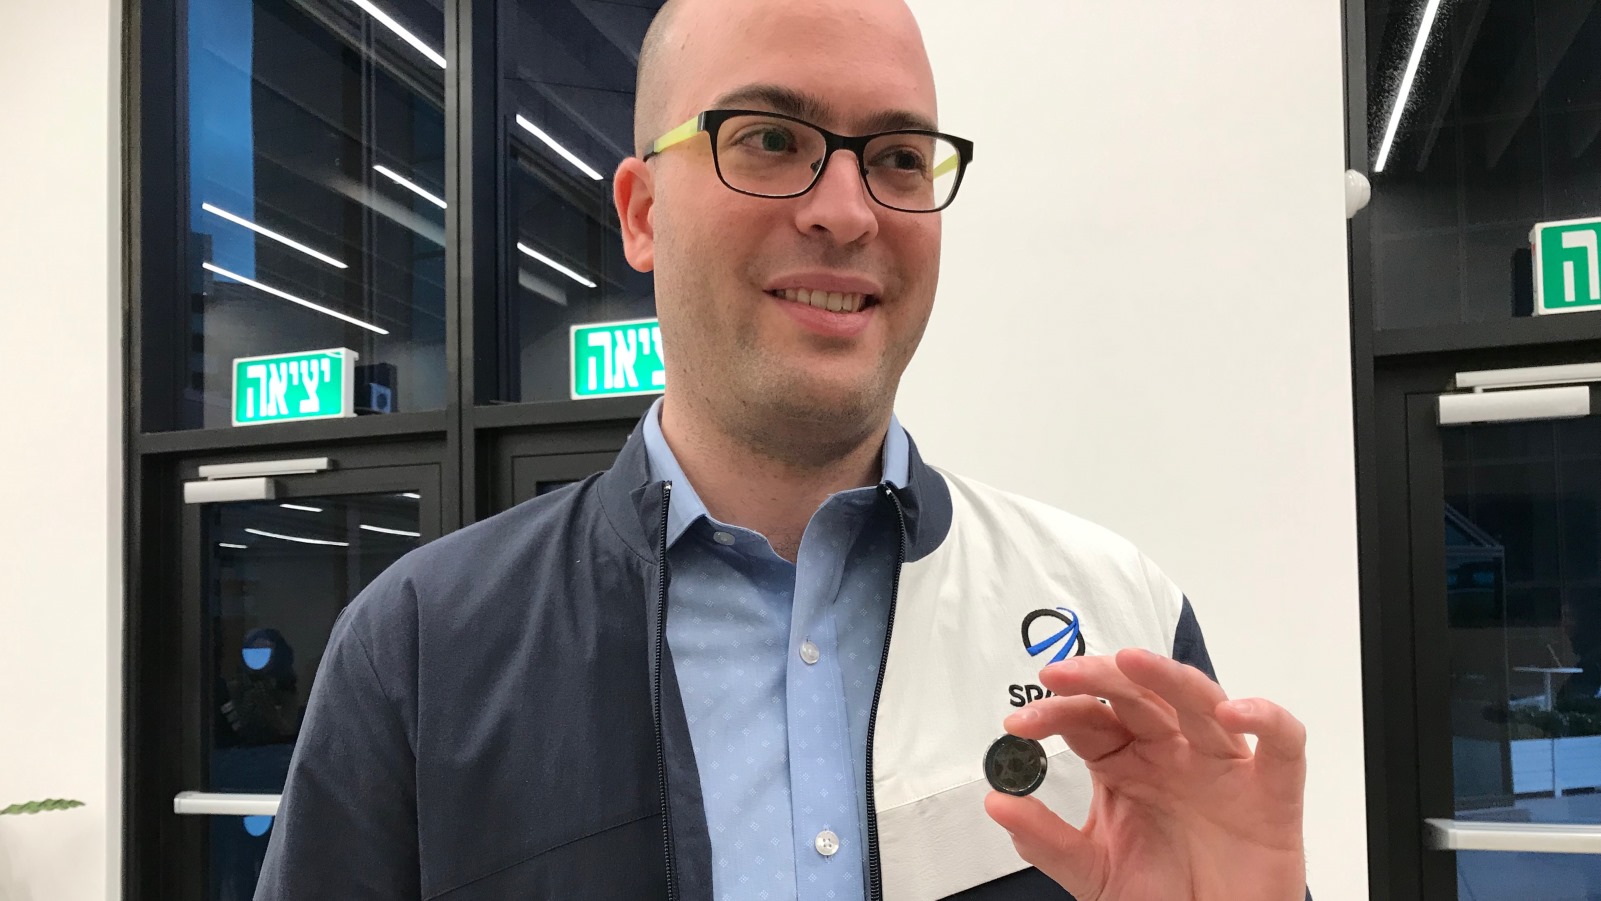 SpaceIL cofounder Yonatan Winetraub displaying a copy of the coin-size nano Bible in the time capsule aboard Beresheet. Photo by Abigail Klein Leichman